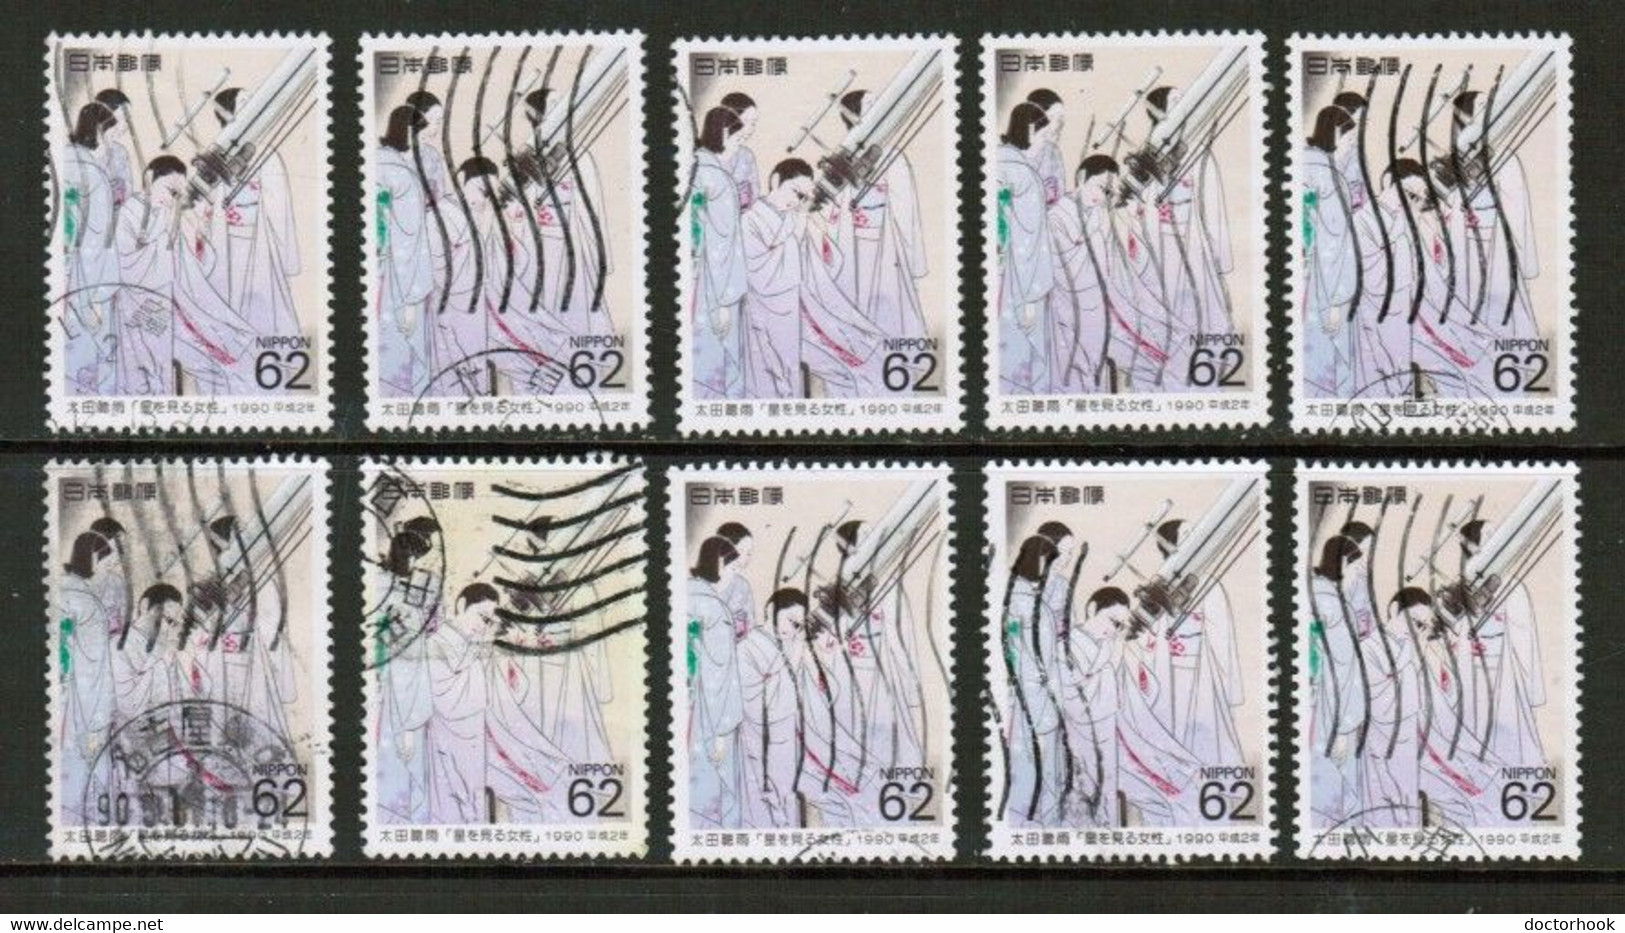 JAPAN   Scott # 2022 USED WHOLESALE LOT OF 10 (CONDITION AS PER SCAN) (WH-588) - Colecciones & Series